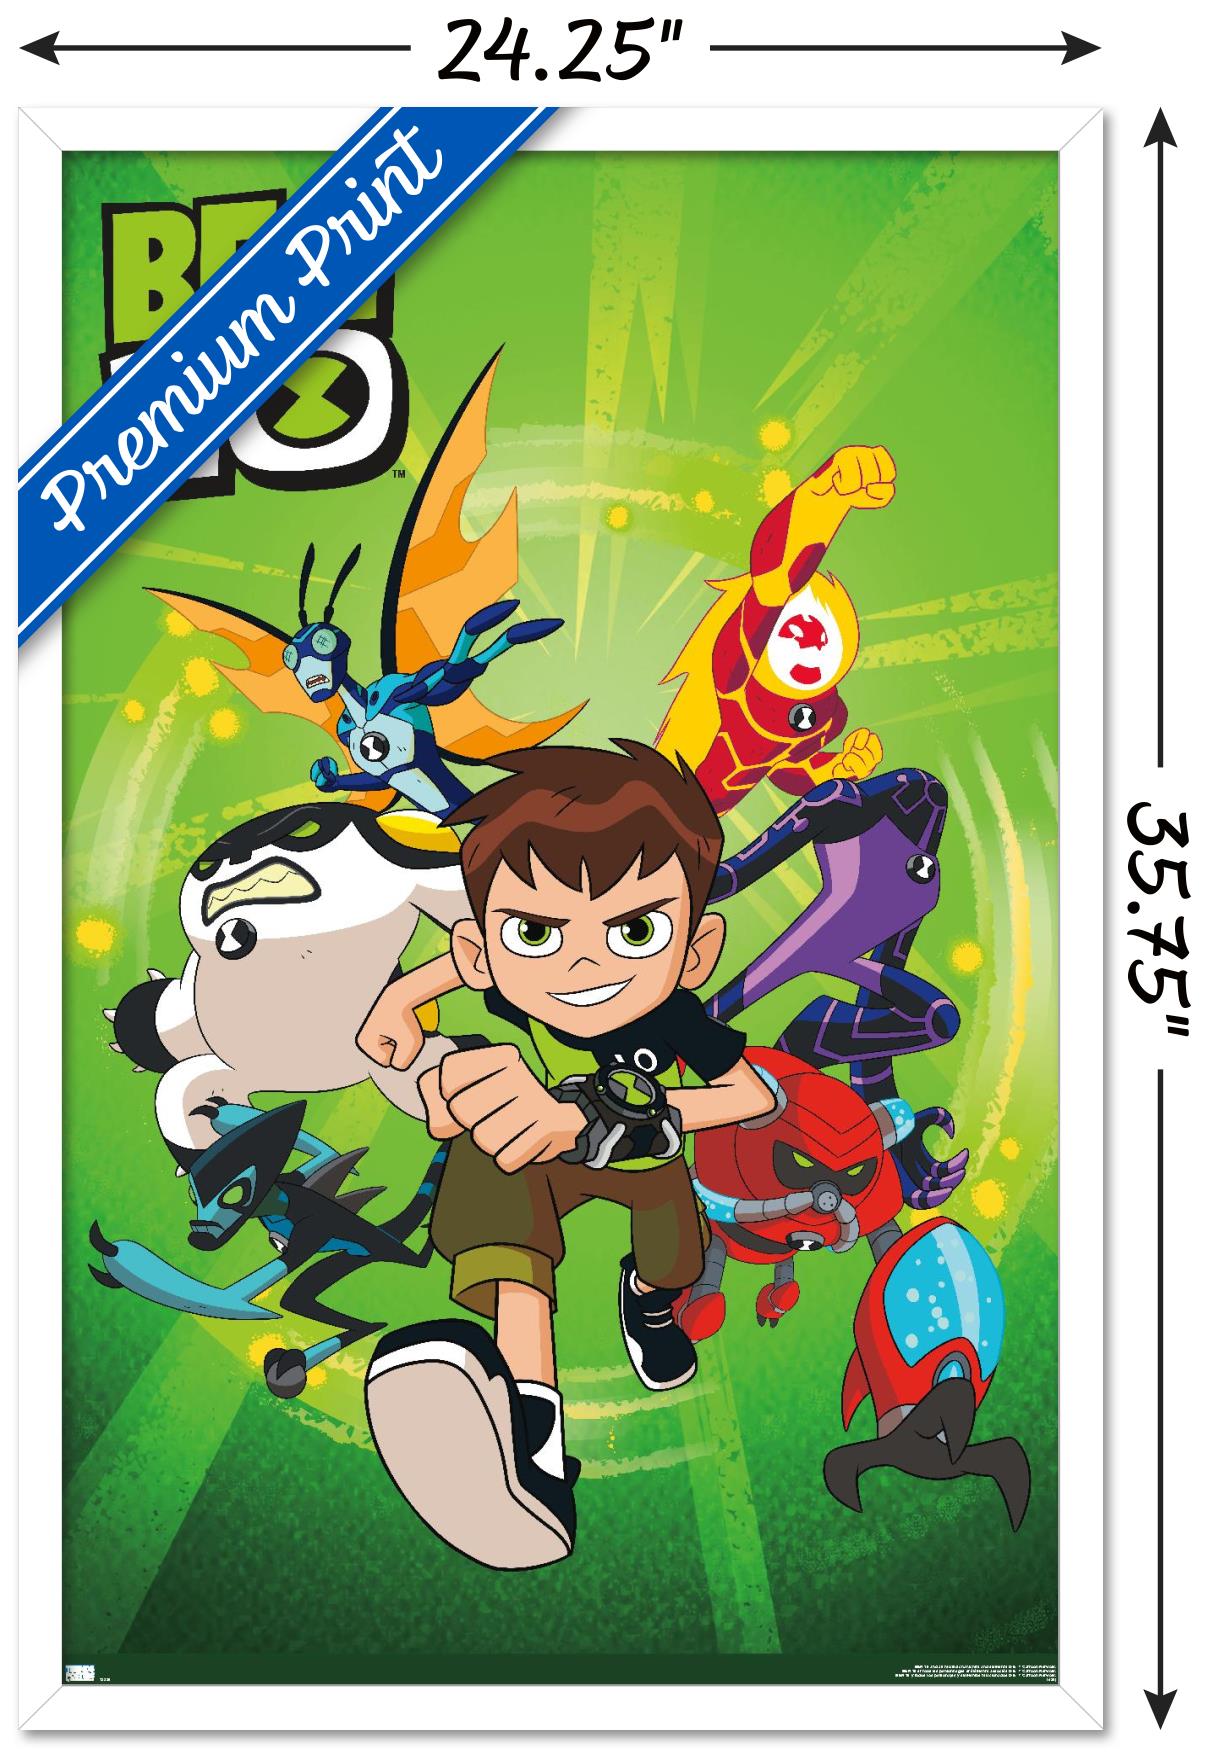 Ben 10 - Group Wall Poster, 22.375" x 34", Framed - image 3 of 5